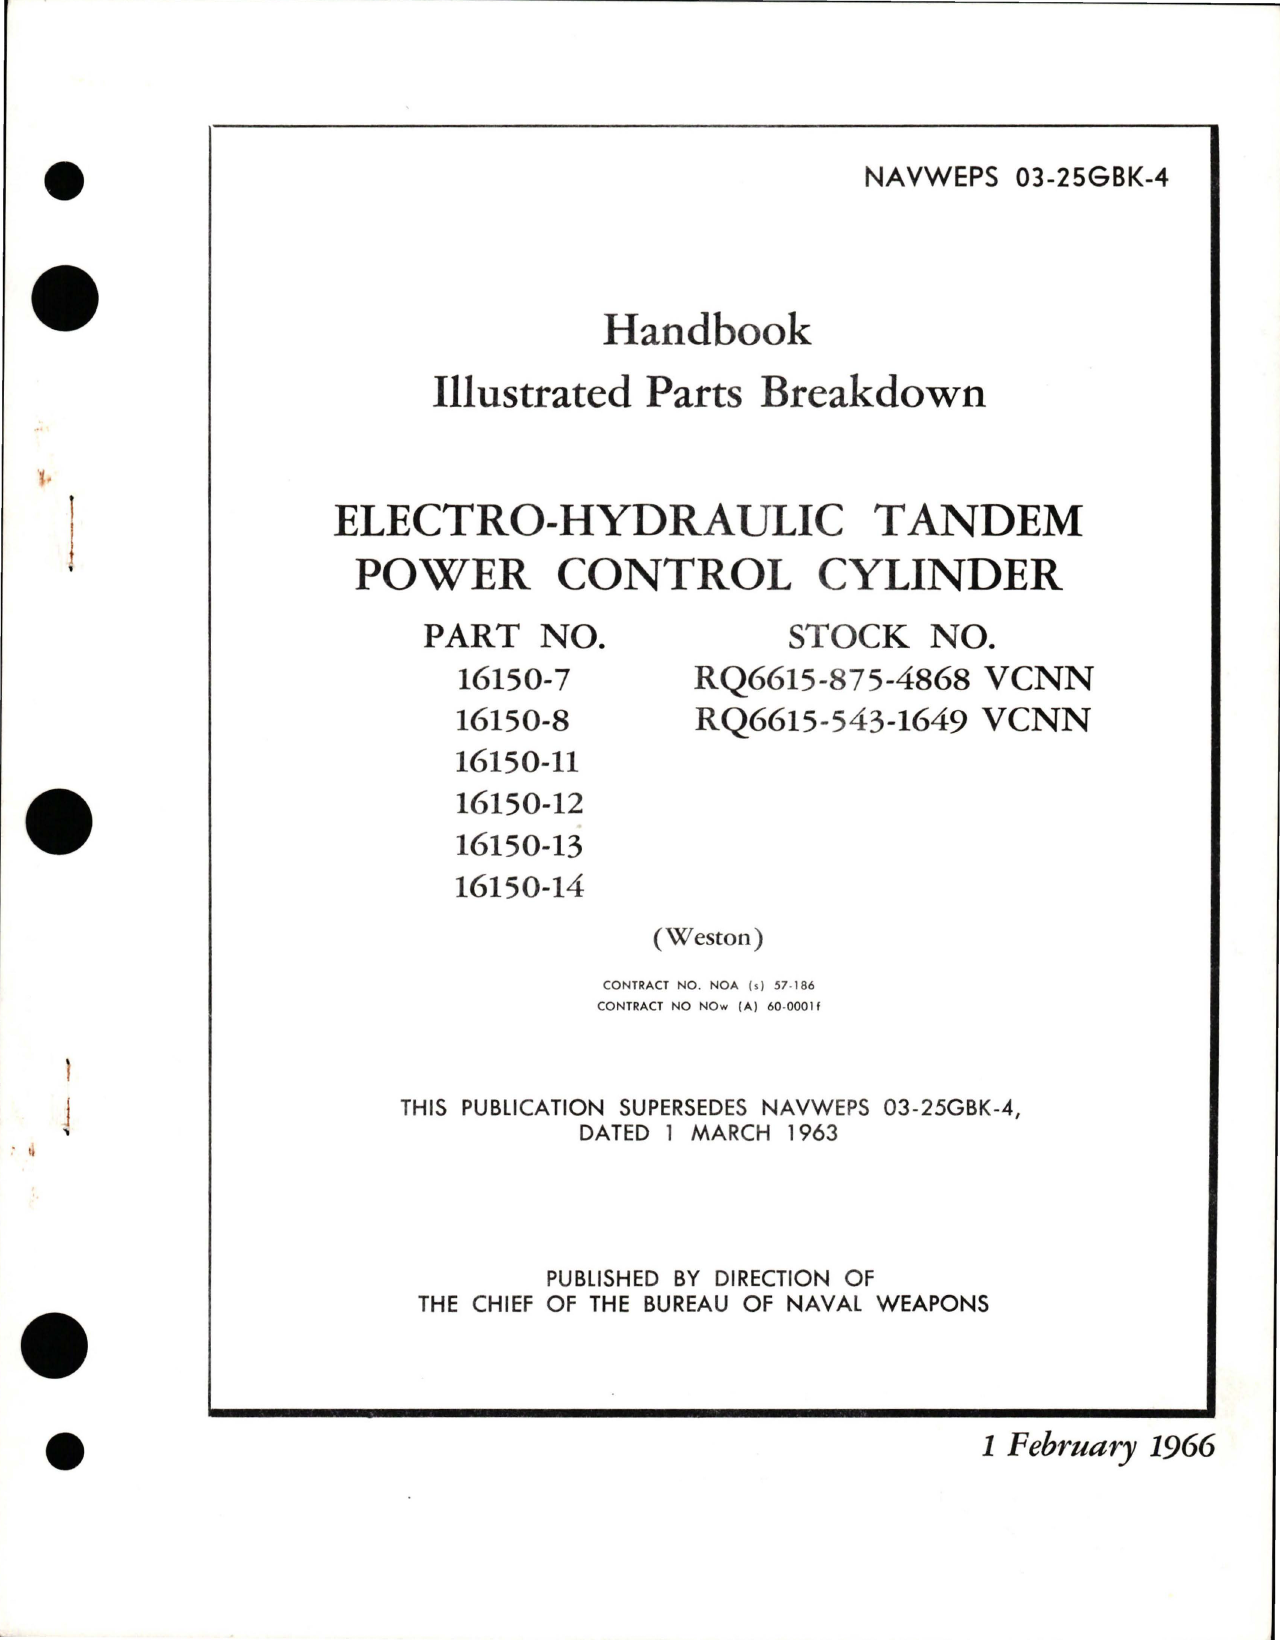 Sample page 1 from AirCorps Library document: Illustrated Parts Breakdown for Electro-Hydraulic Tandem Power Control Cylinder - Parts 16150-7, 16150-8, 16150-11, 16150-12, 16150-13, and 16150-14